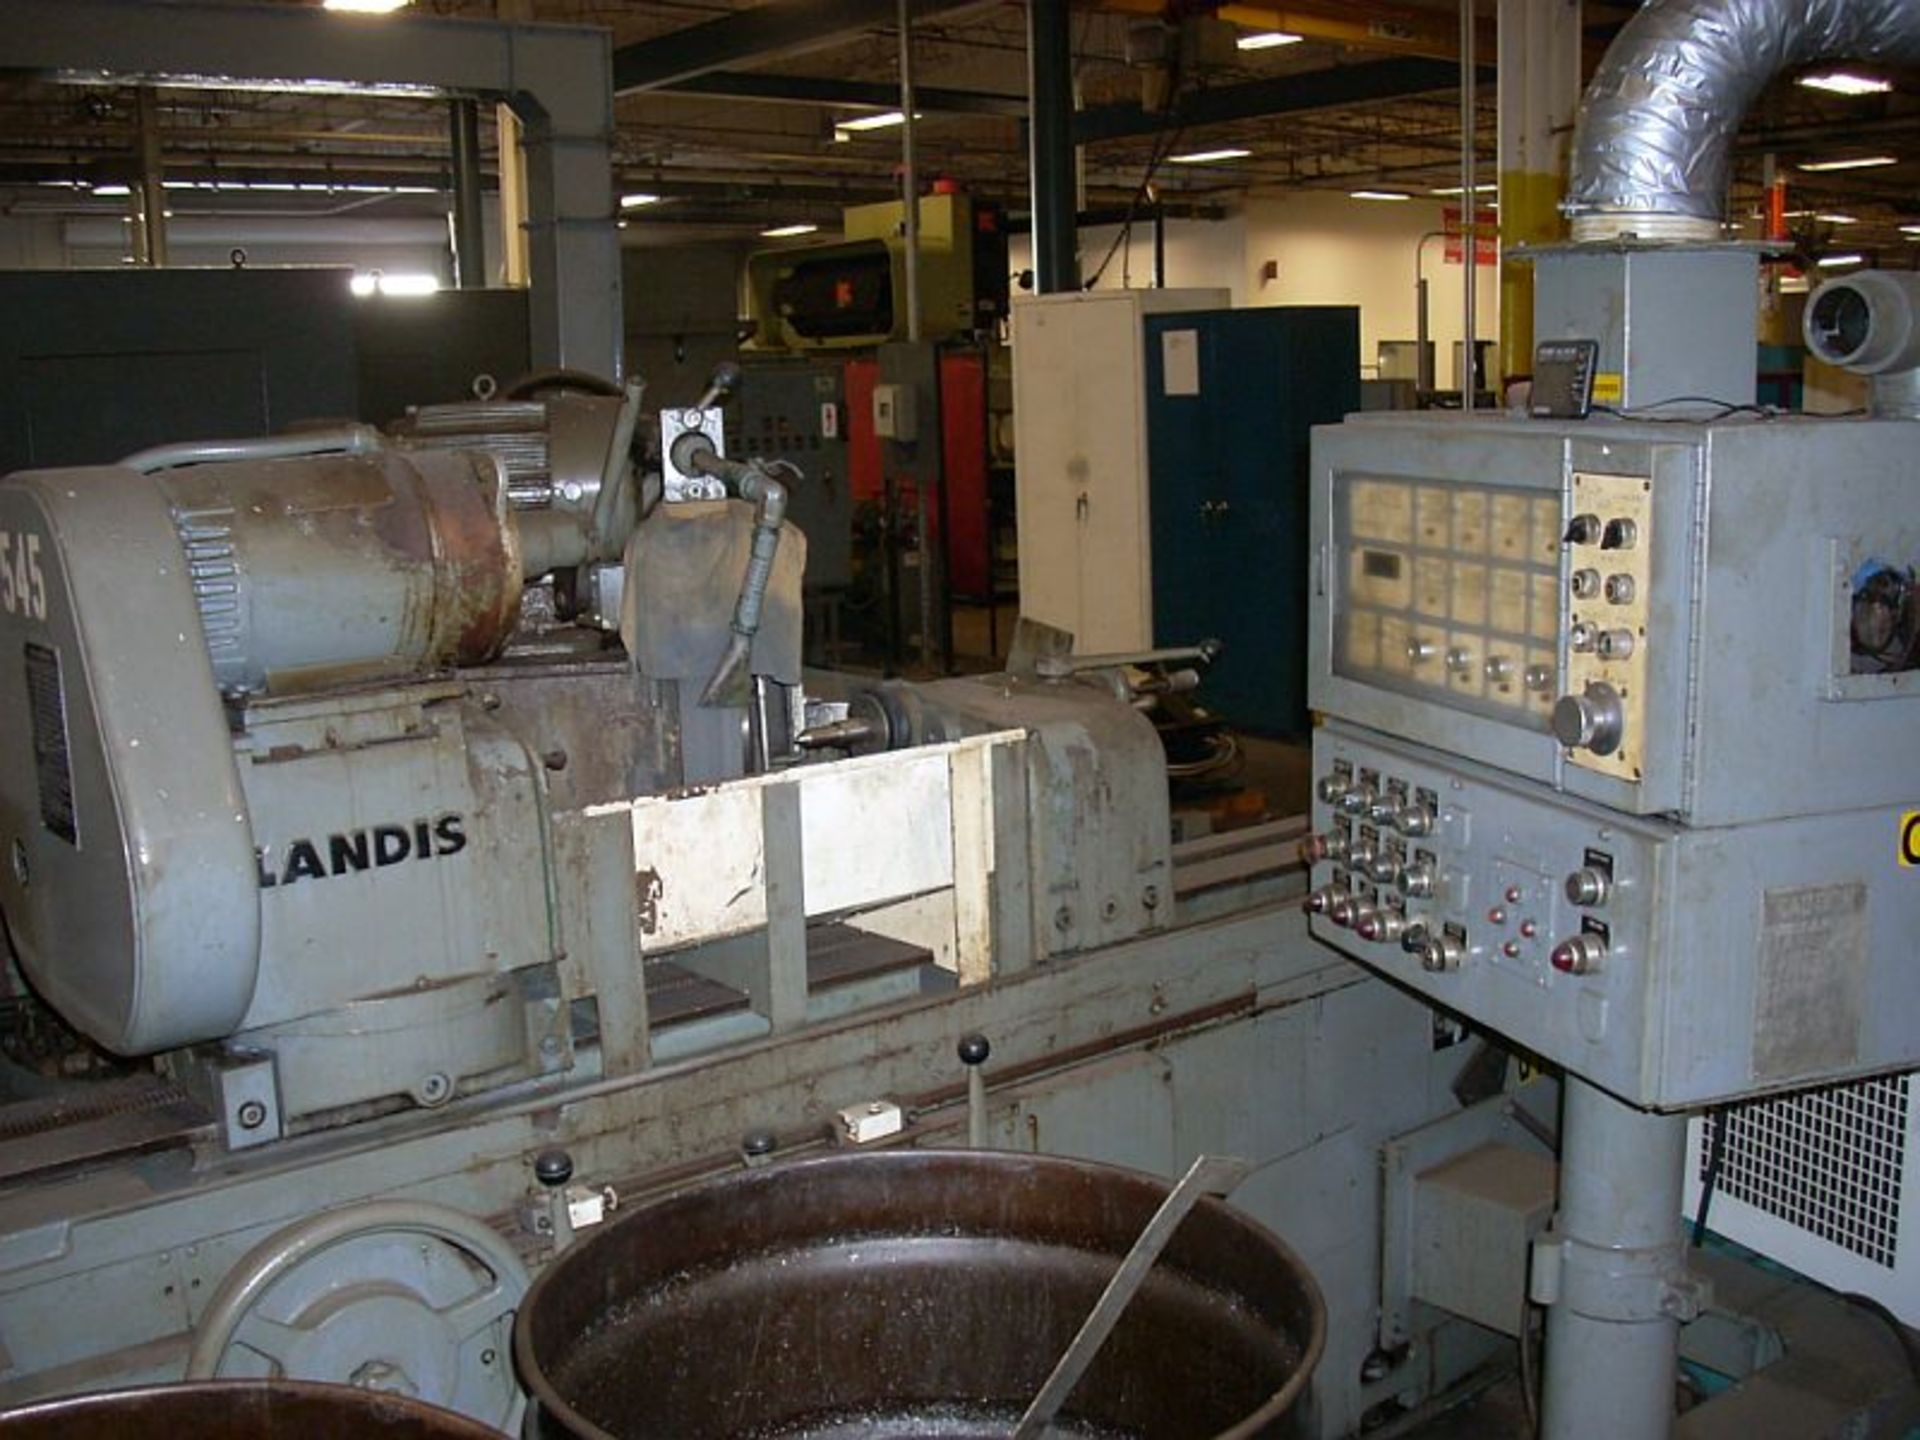 18” x 72” Landis 3RH Universal Cylindrical Grinder, Microtronic infeed, 16” x 2” grinding wheel